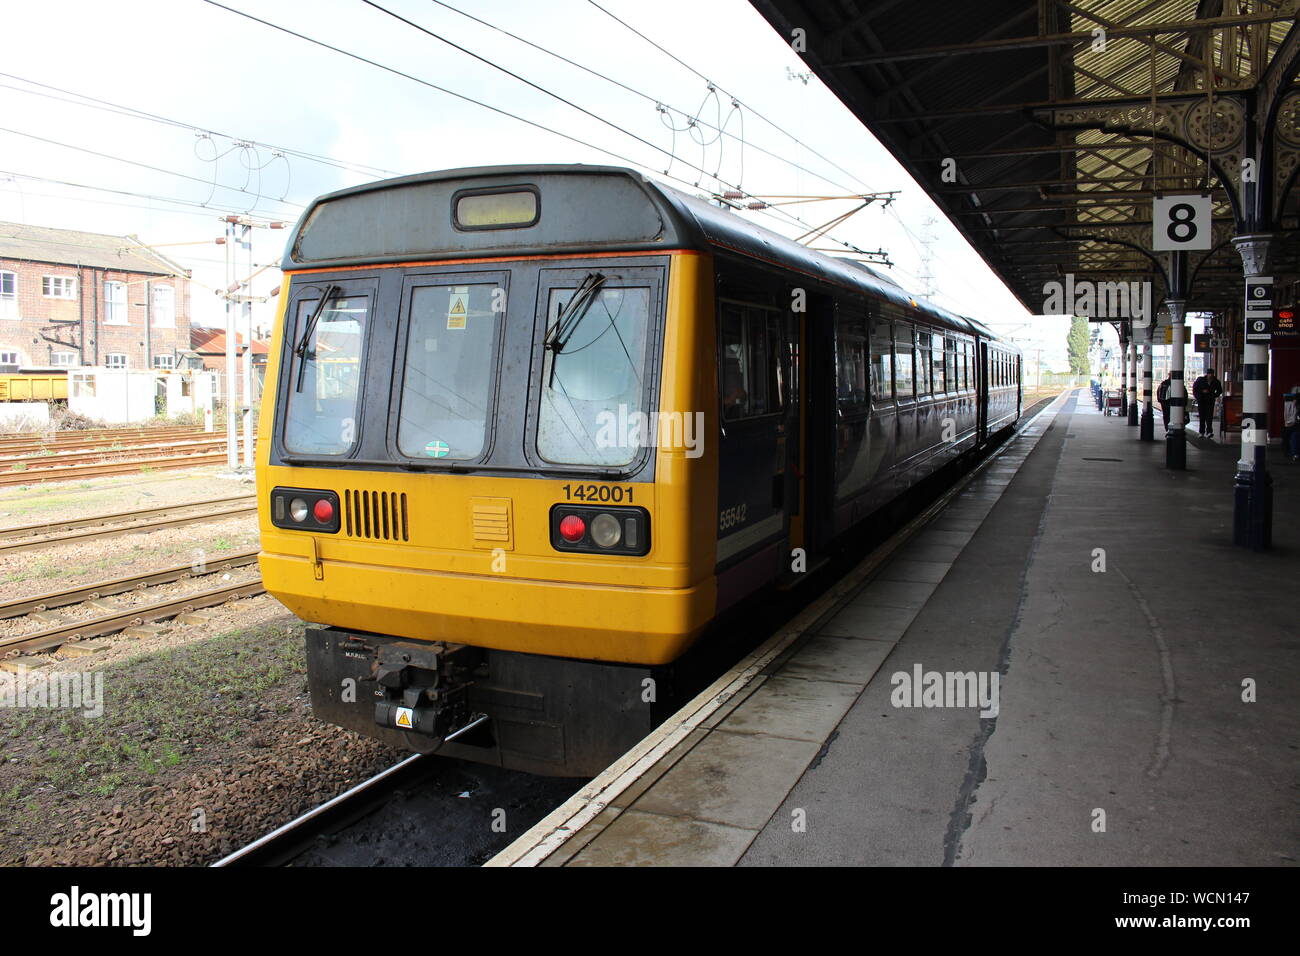 The original Pacer railbus 142 001 at Doncaster station Stock Photo